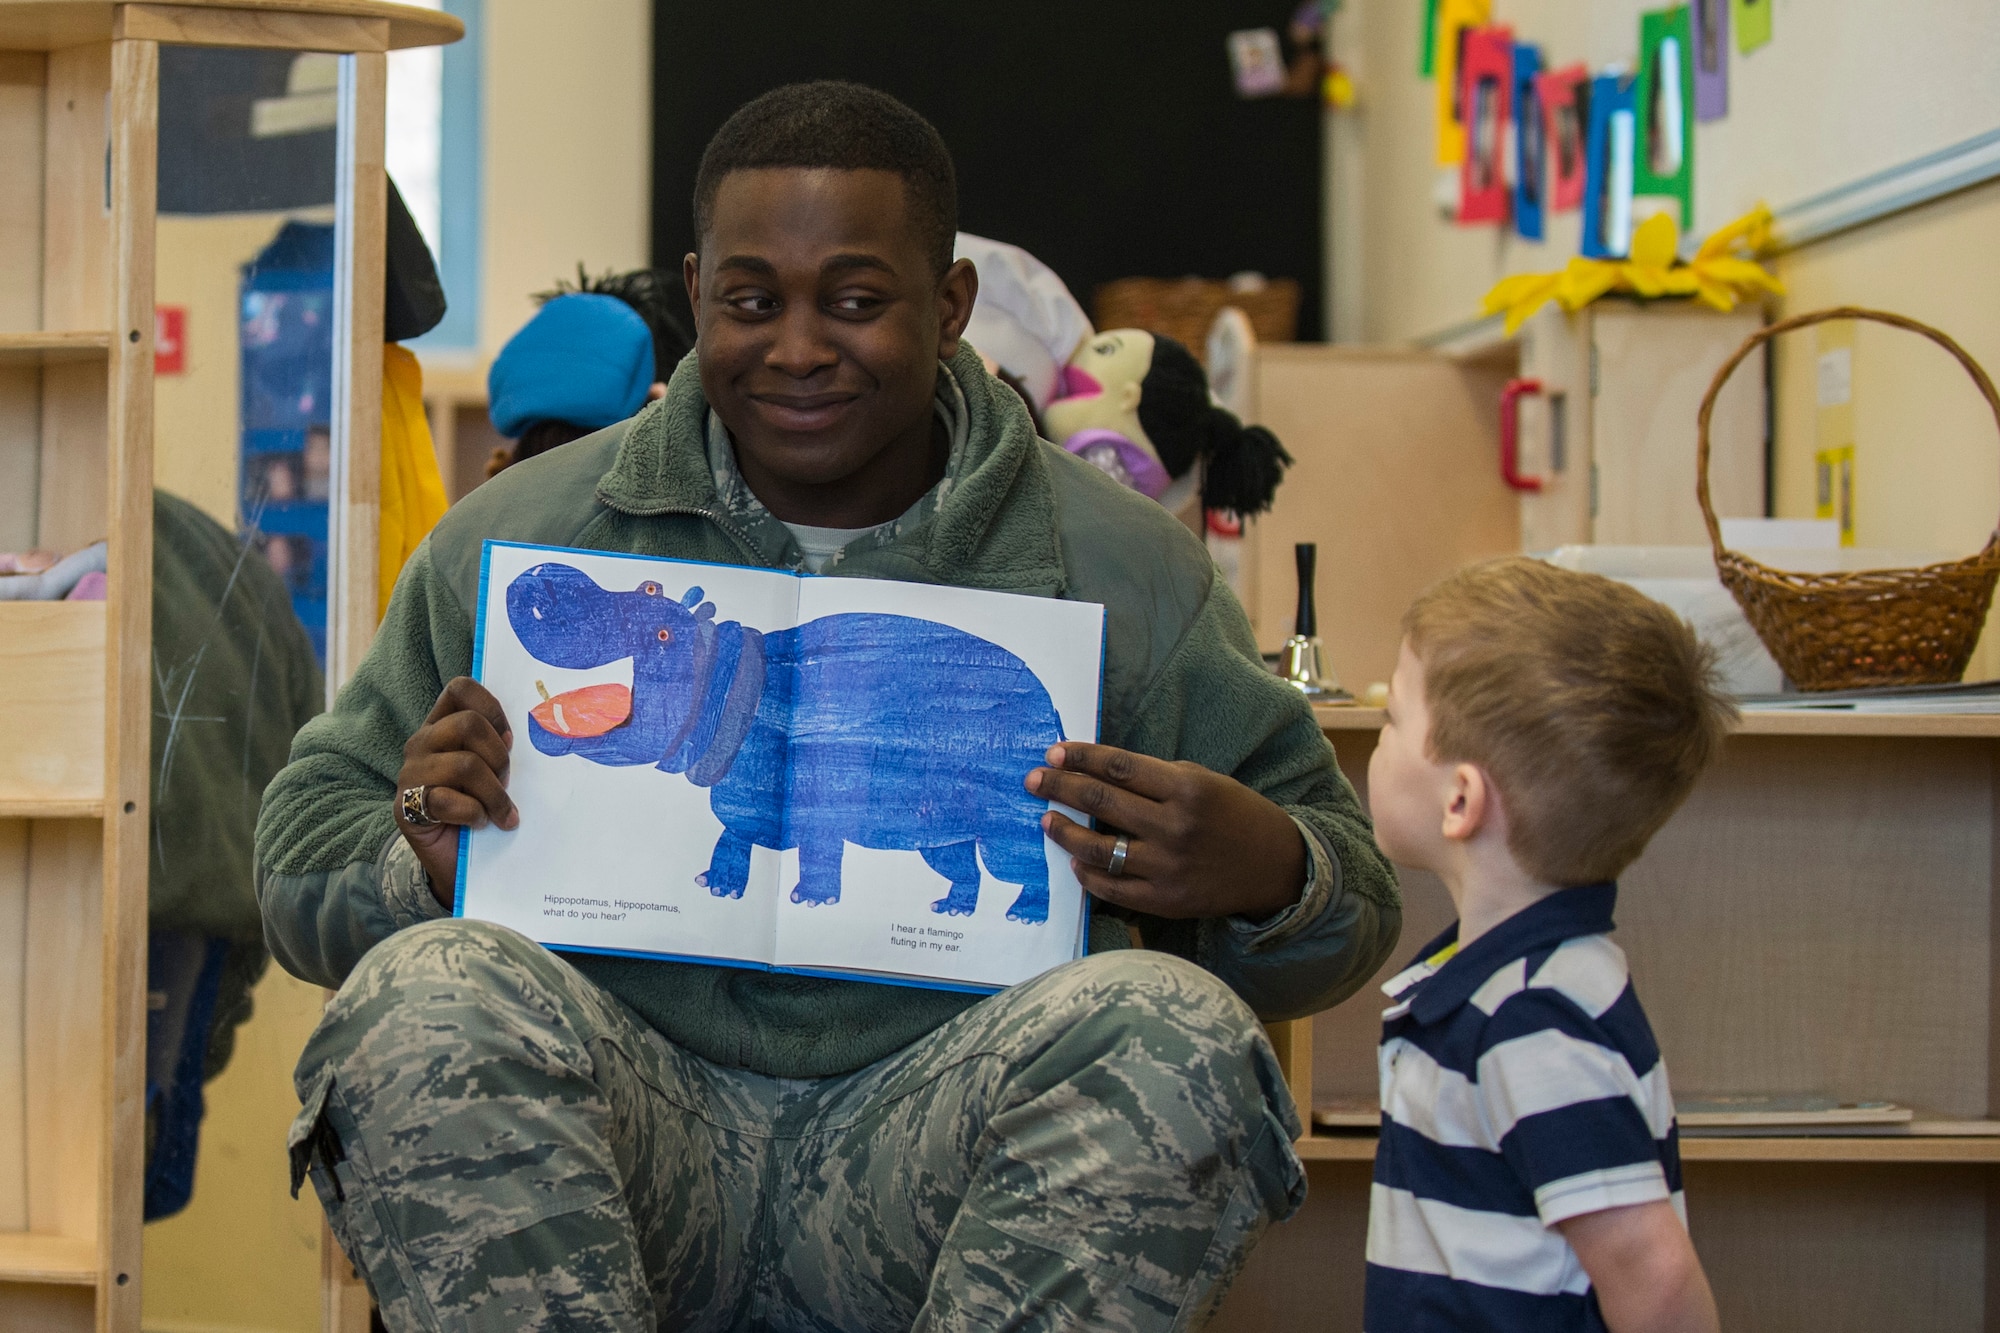 U.S. Air Force Senior Airman Emanuel Jordan, a 52nd Security Forces Squadron member, smiles at a child during the third annual Dr. Martin Luther King Jr. ‘Reading Is A Civil Right’ reading drive at the Child Development Center on Spangdahlem Air Base, Germany, Jan. 14, 2016. The CDC welcomed volunteers to read to children between the ages of 1 and 5. (U.S. Air Force photo by Airman 1st Class Luke Kitterman/Released) 